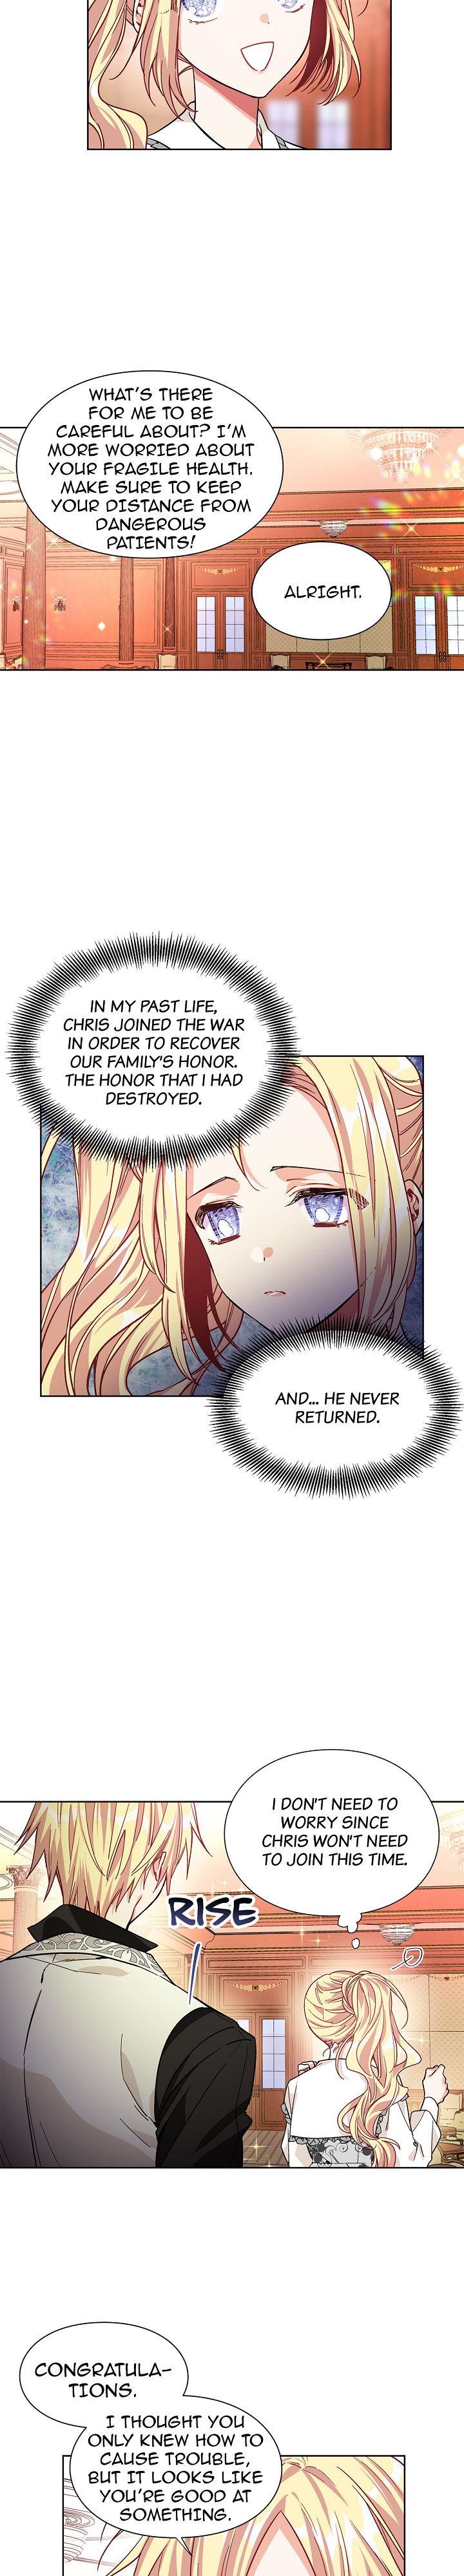 Doctor Elise – The Royal Lady with the Lamp - Chapter 41 Page 6